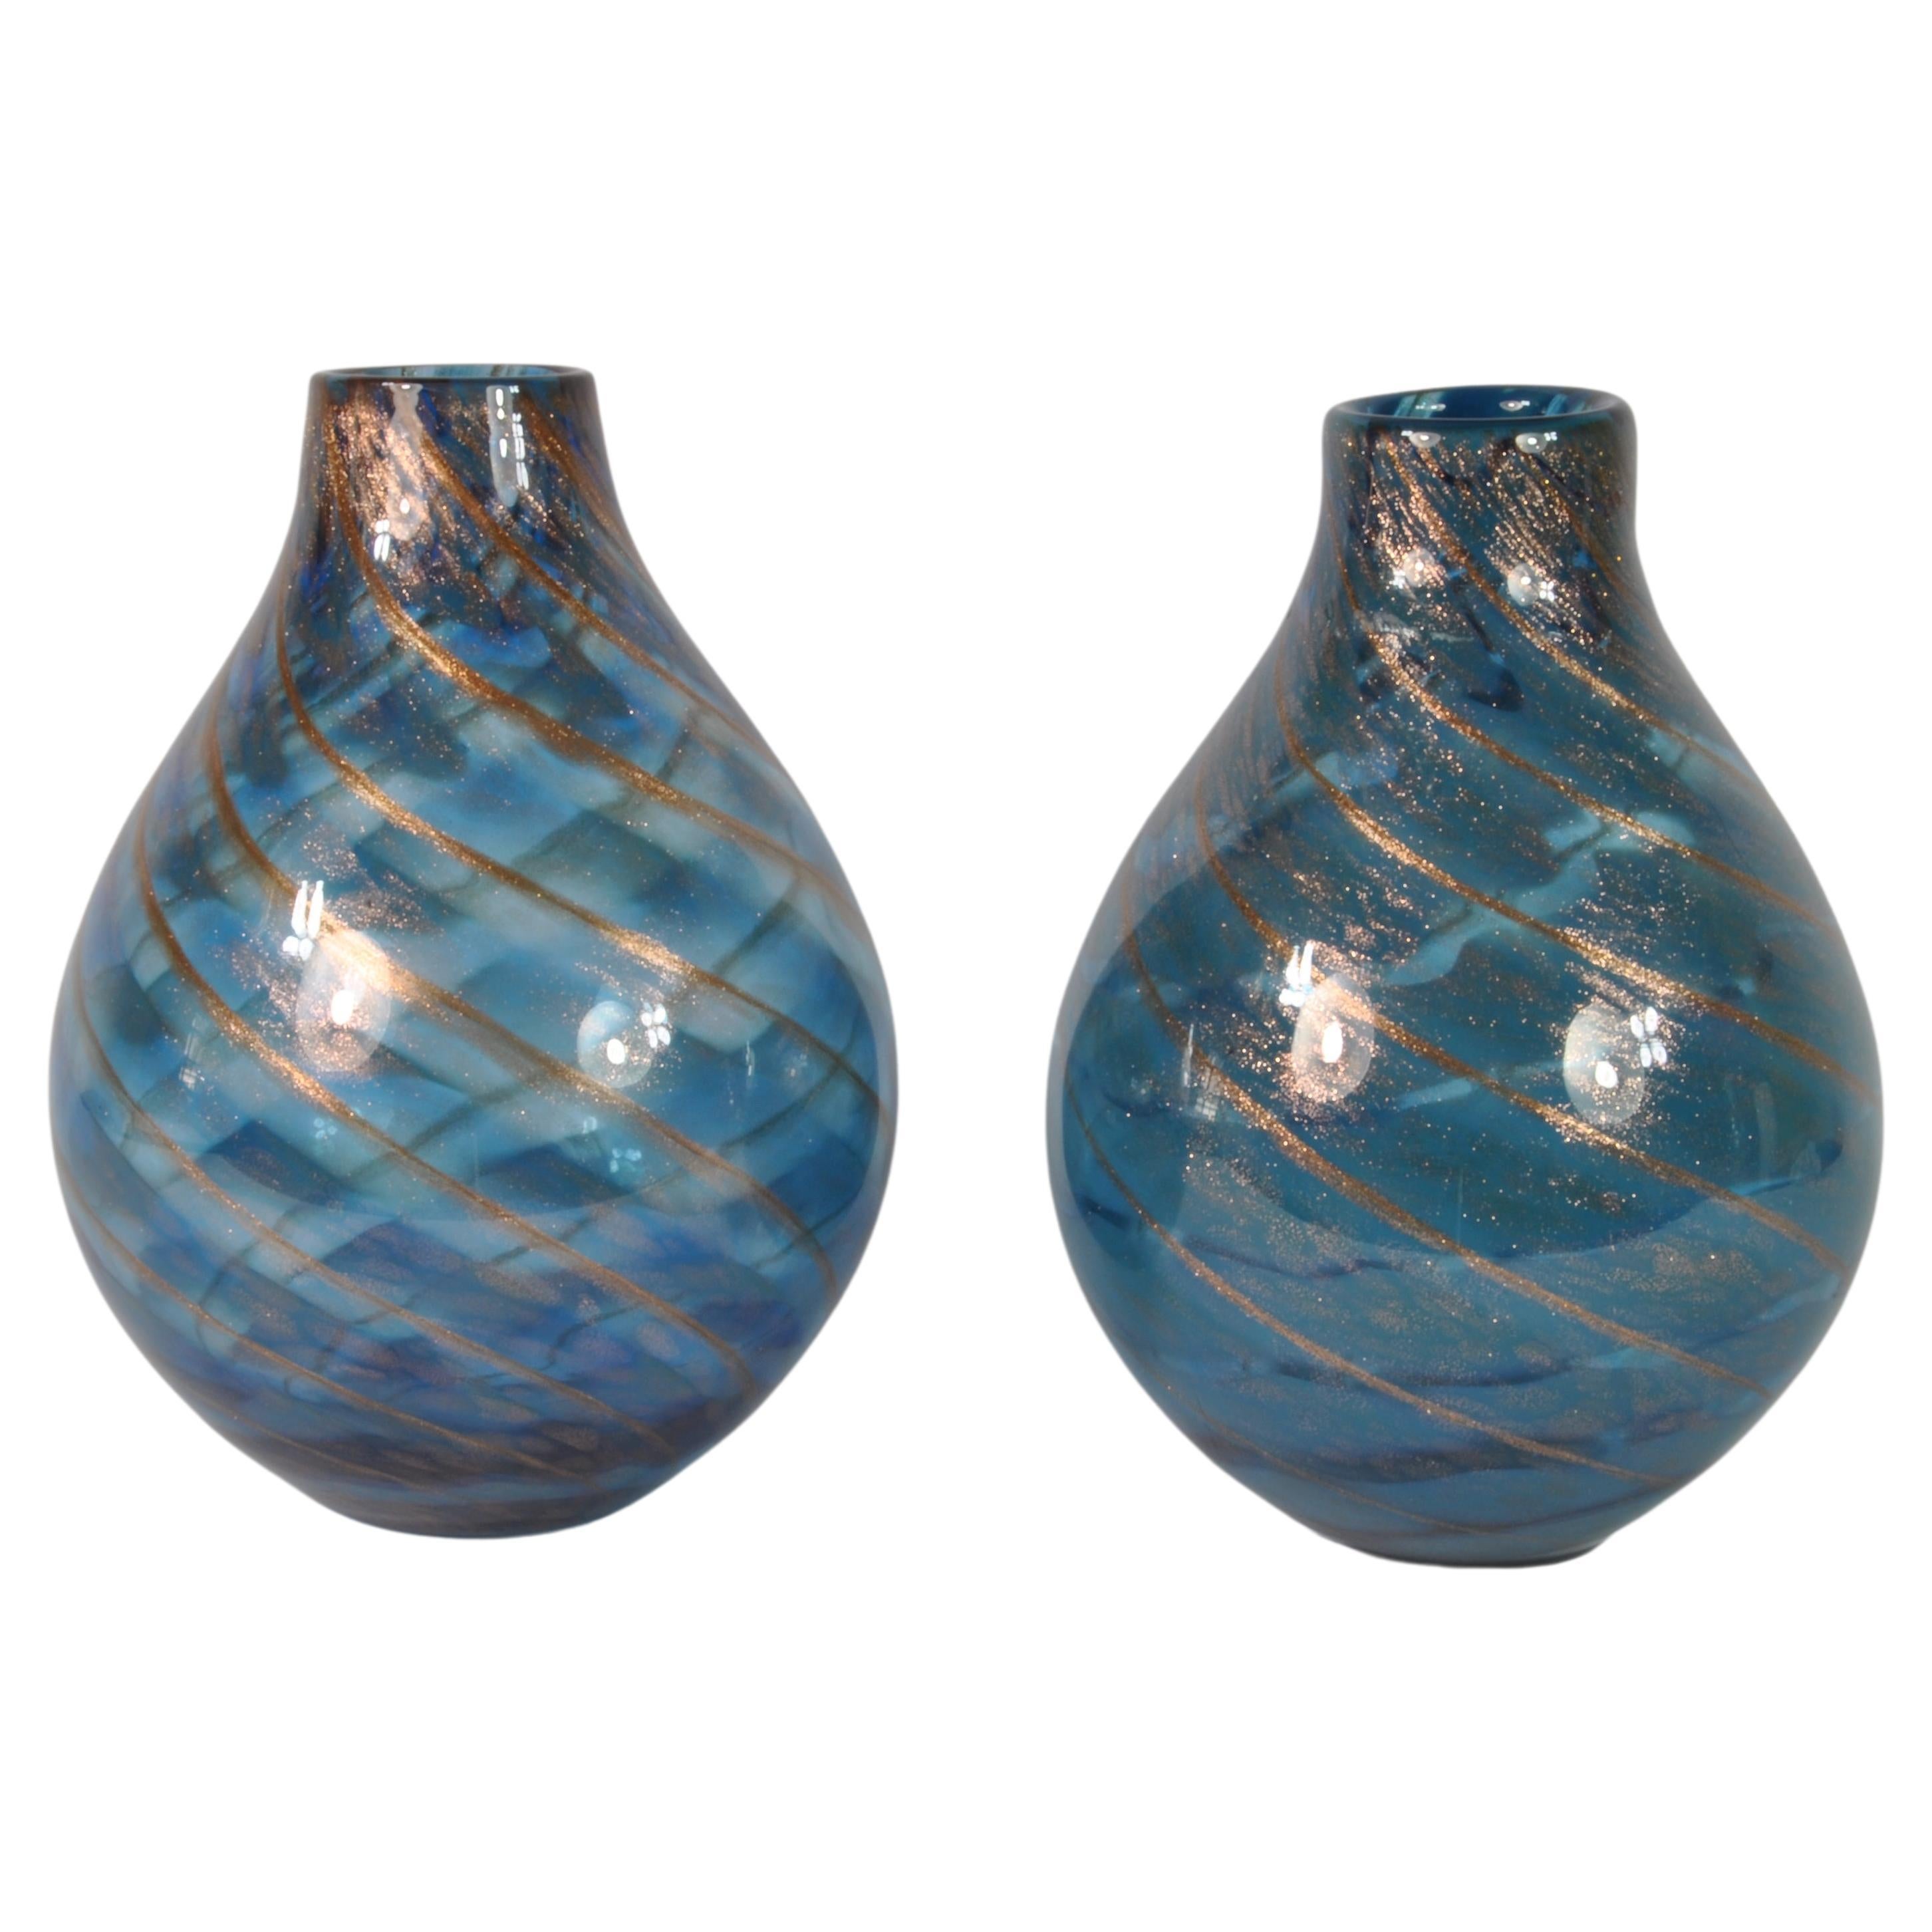 Pair of Murano Glass Vases, Designed by Fratelli Toso, Italy, Late 1960s